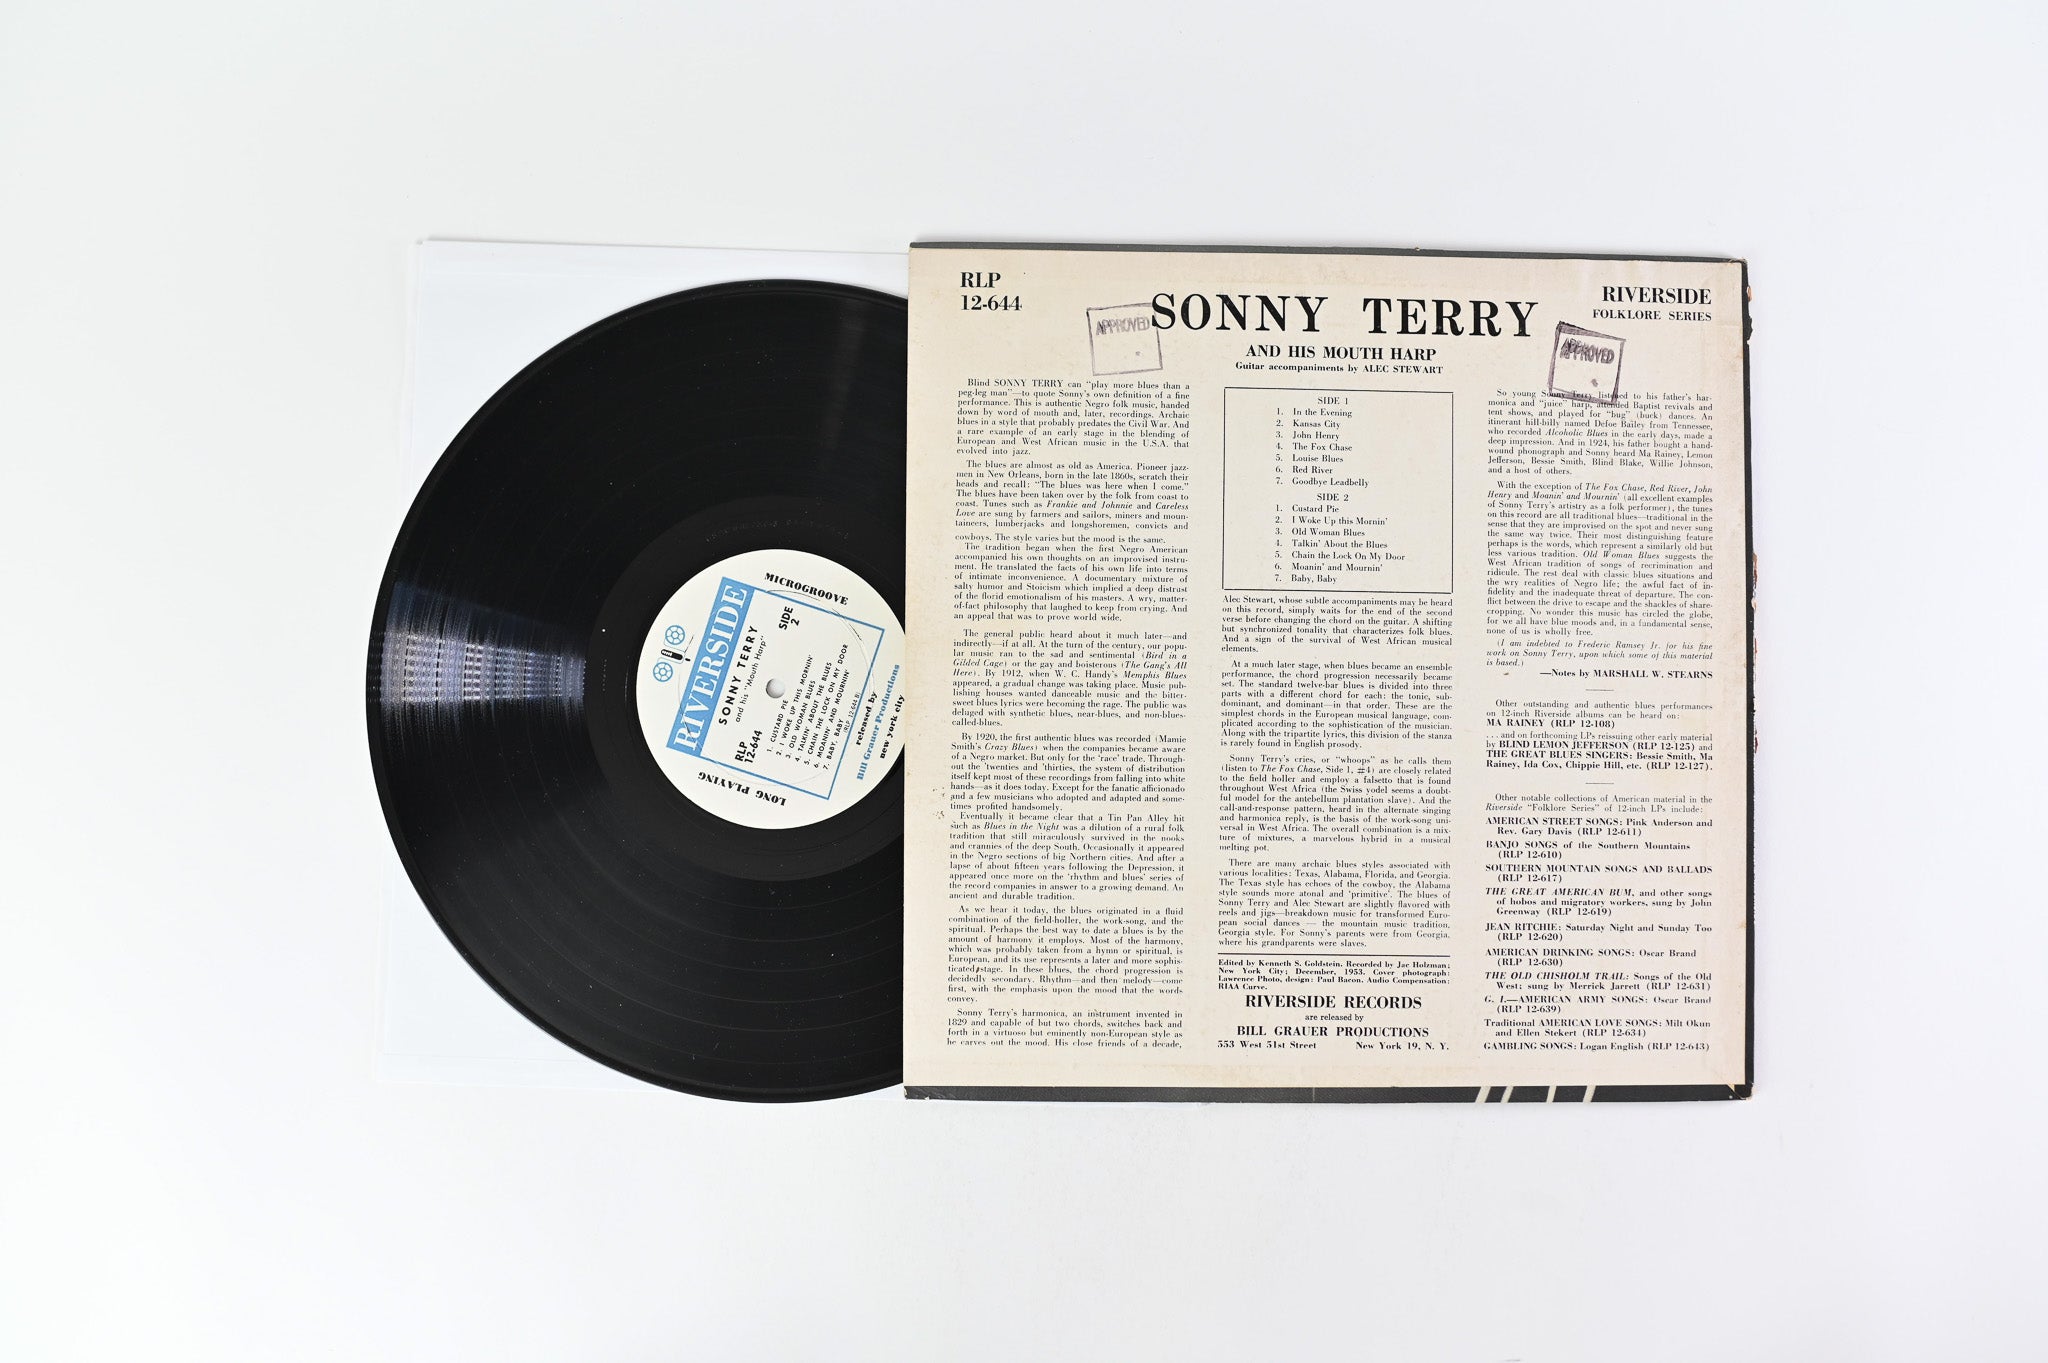 Sonny Terry - Sonny Terry And His Mouth-Harp on Riverside Mono Deep Groove